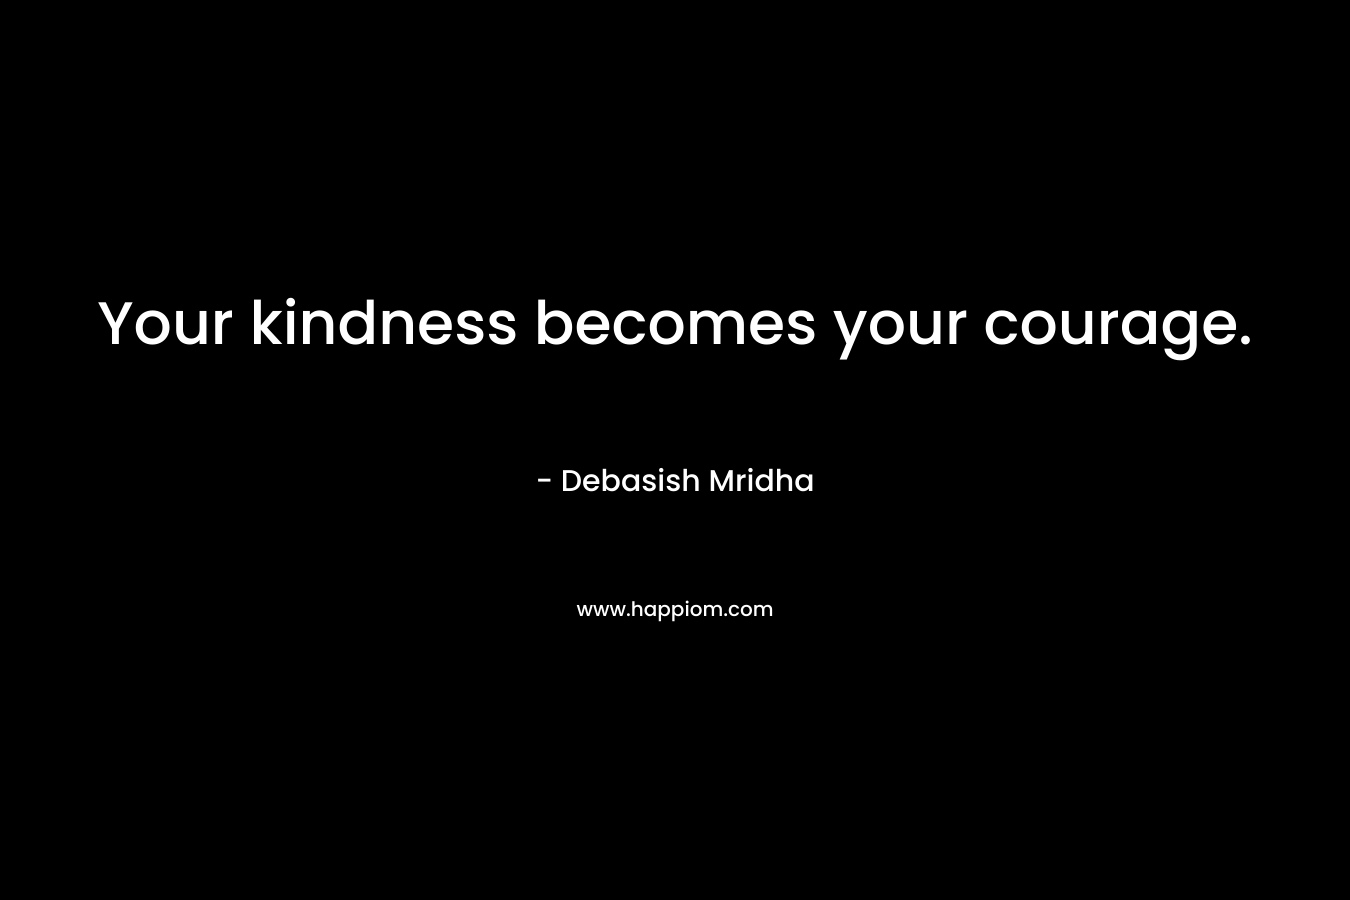 Your kindness becomes your courage.